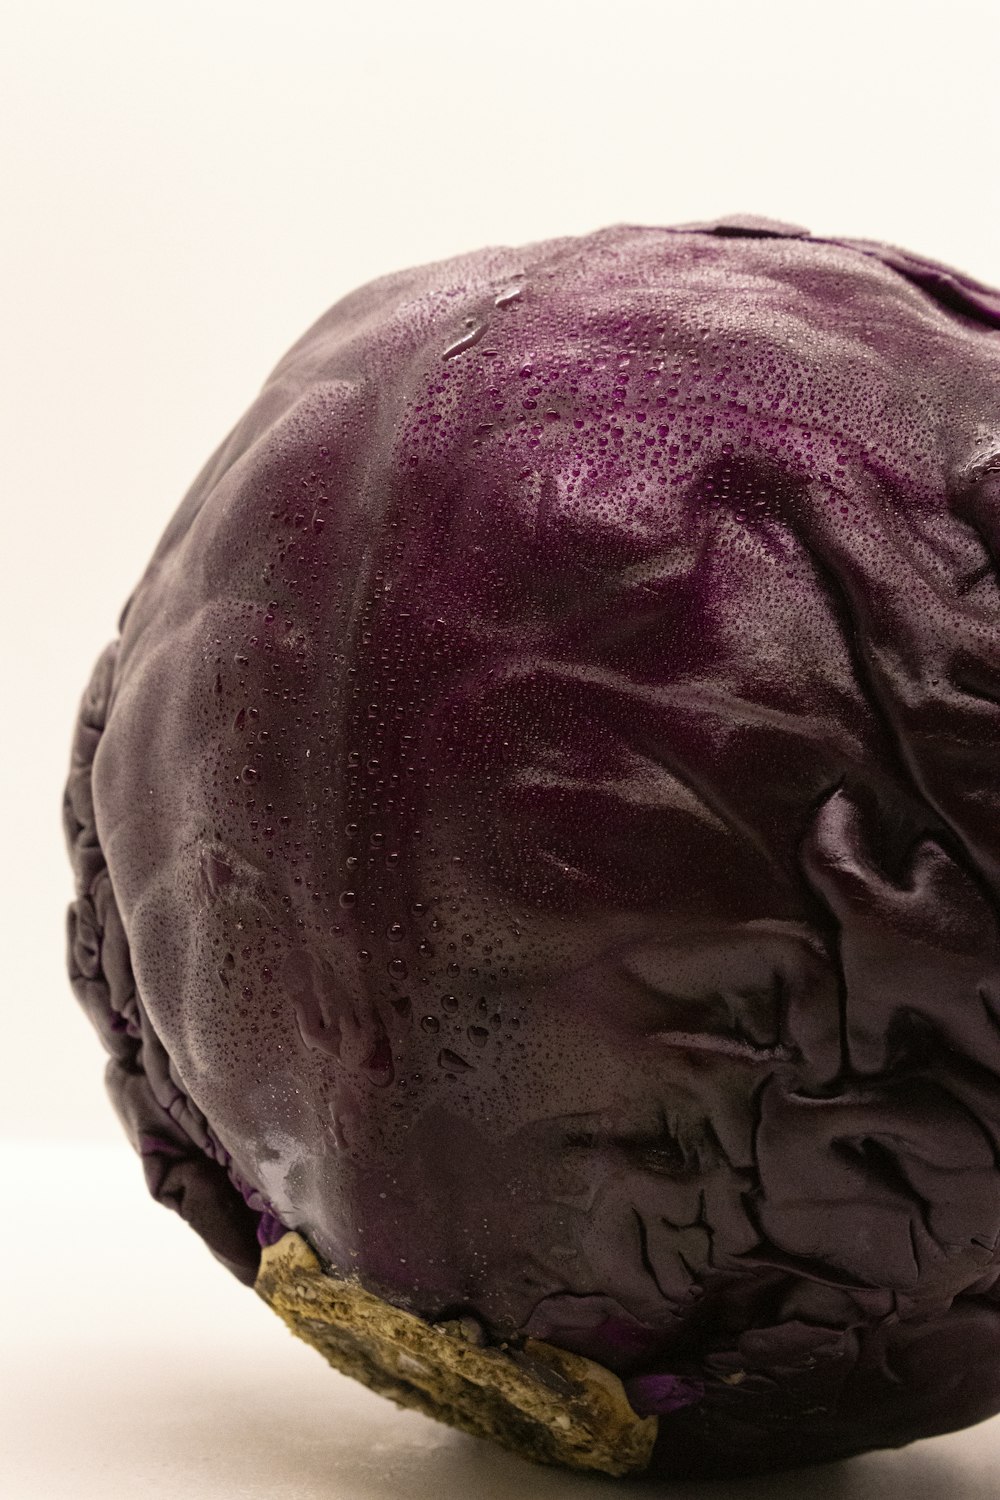 a close up of a purple object on a white surface